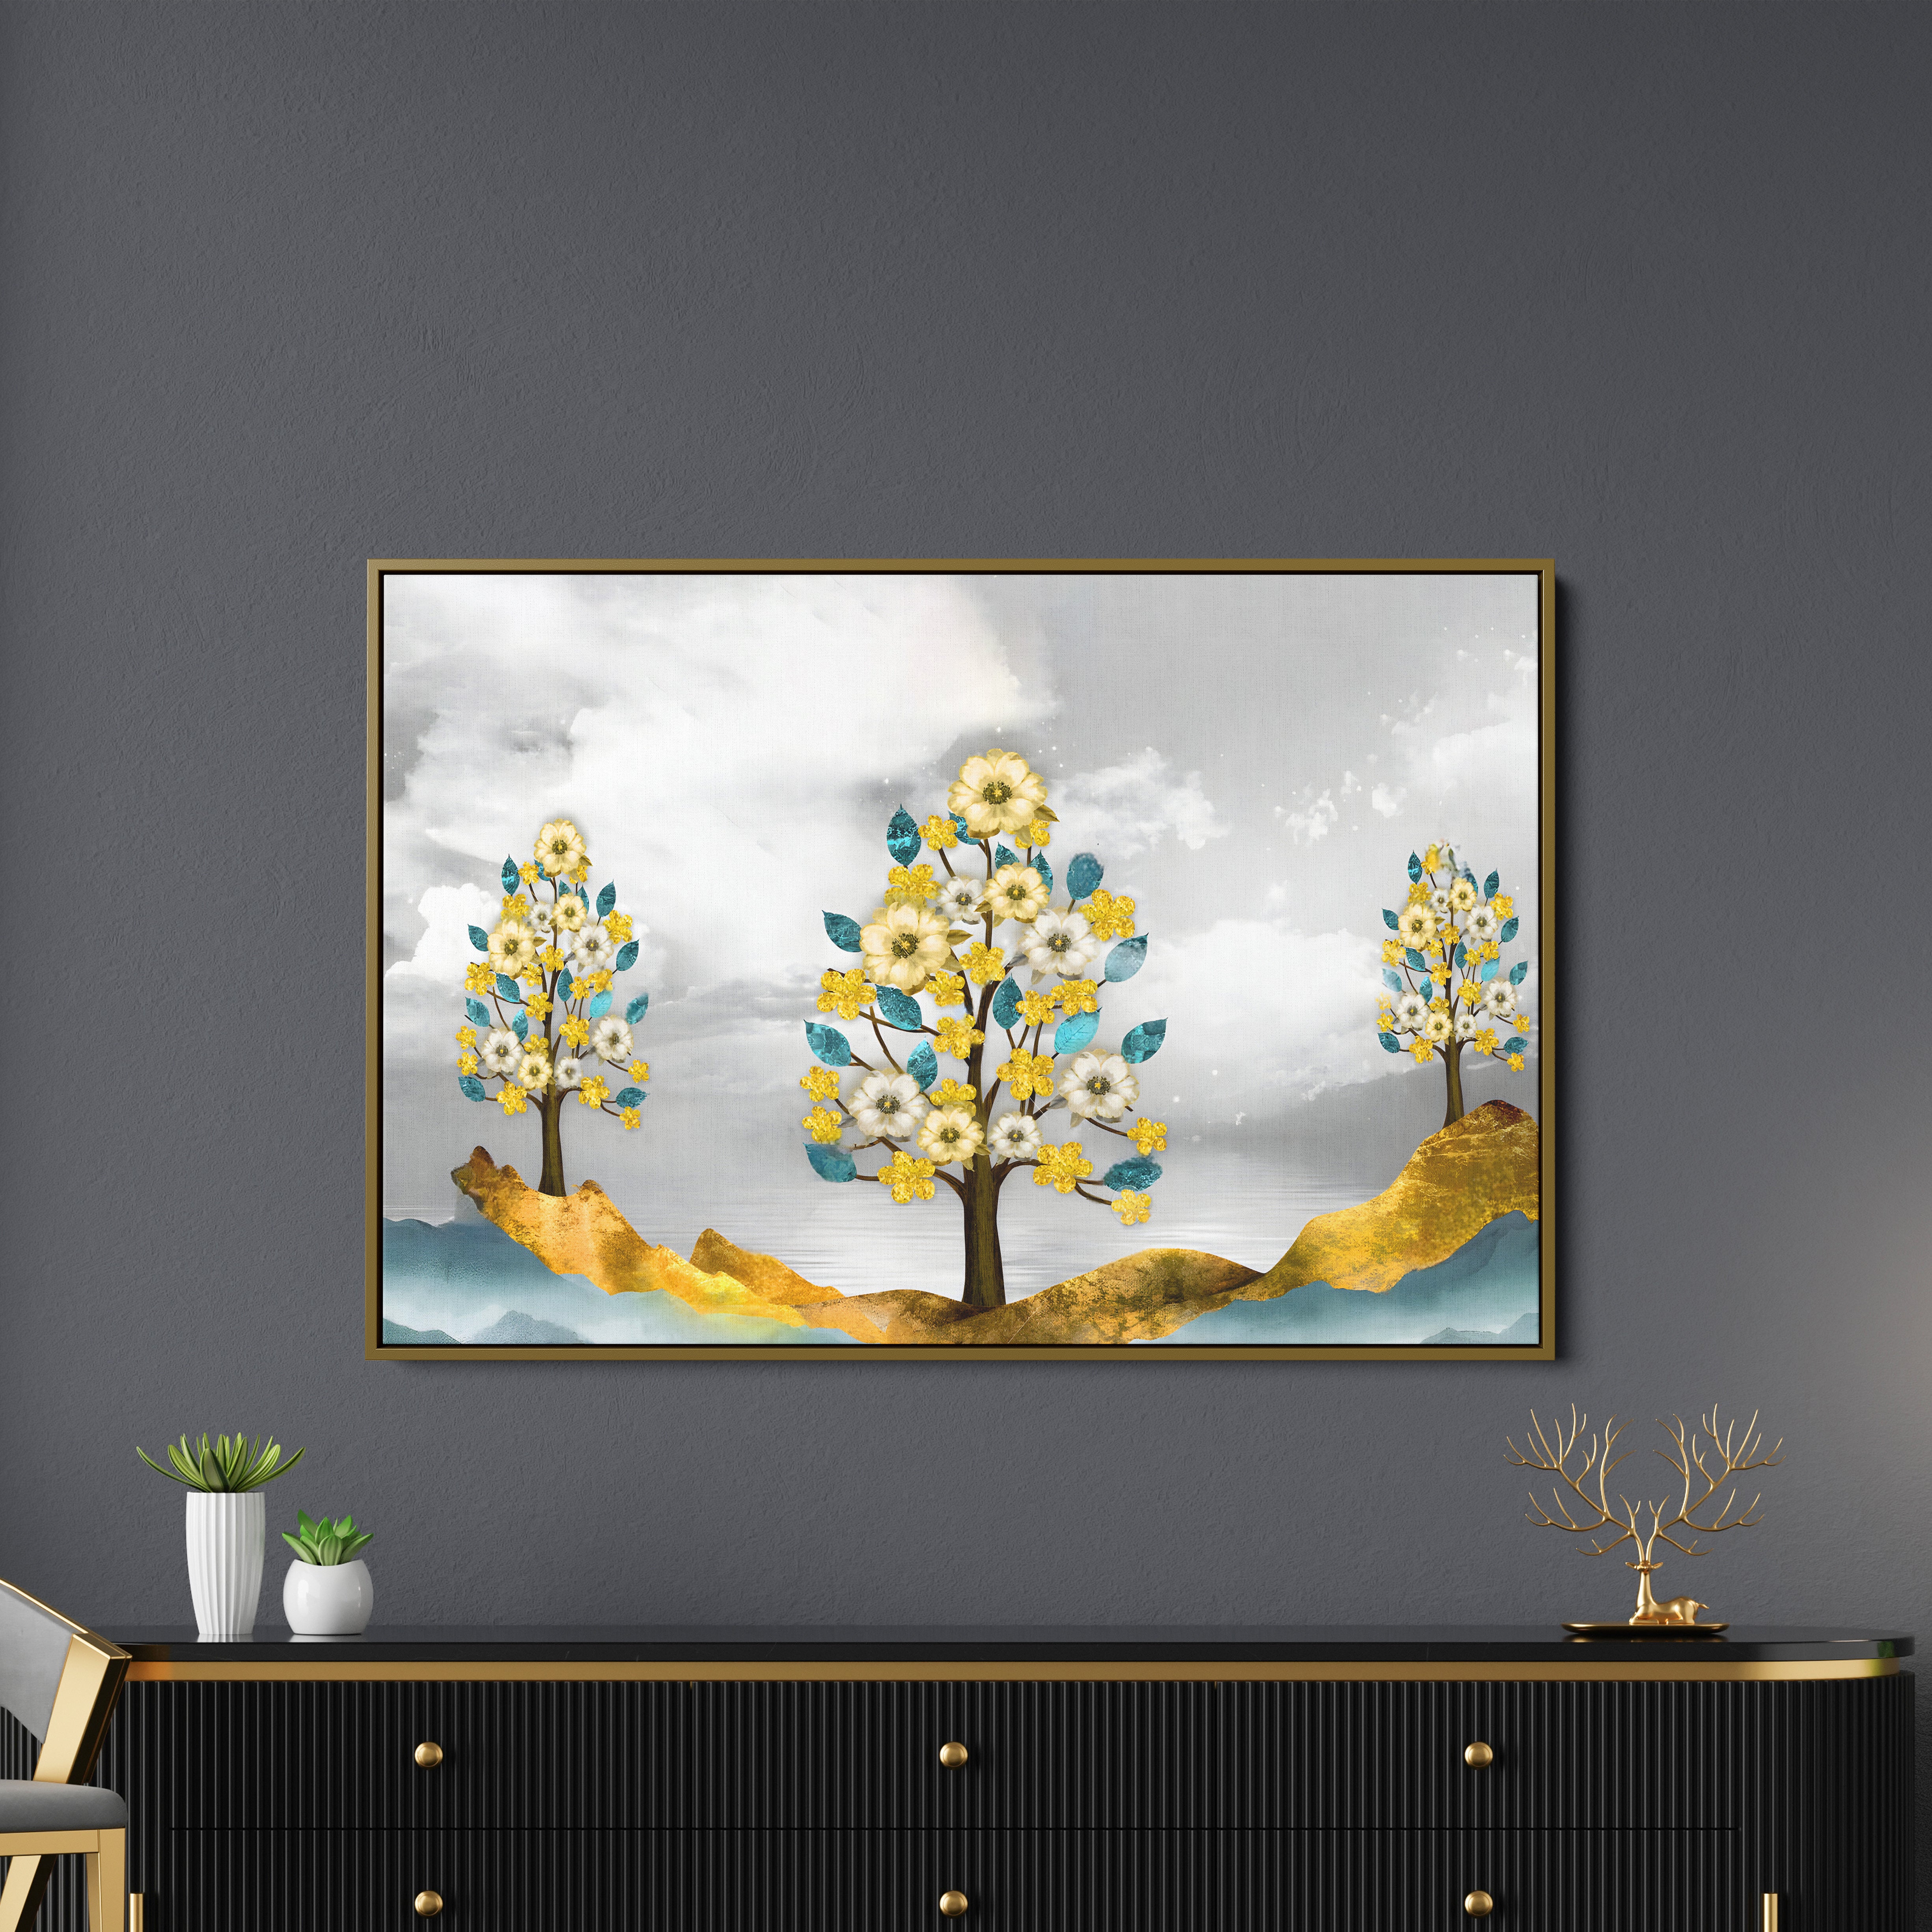 Unique Golden Trees Wall Painting